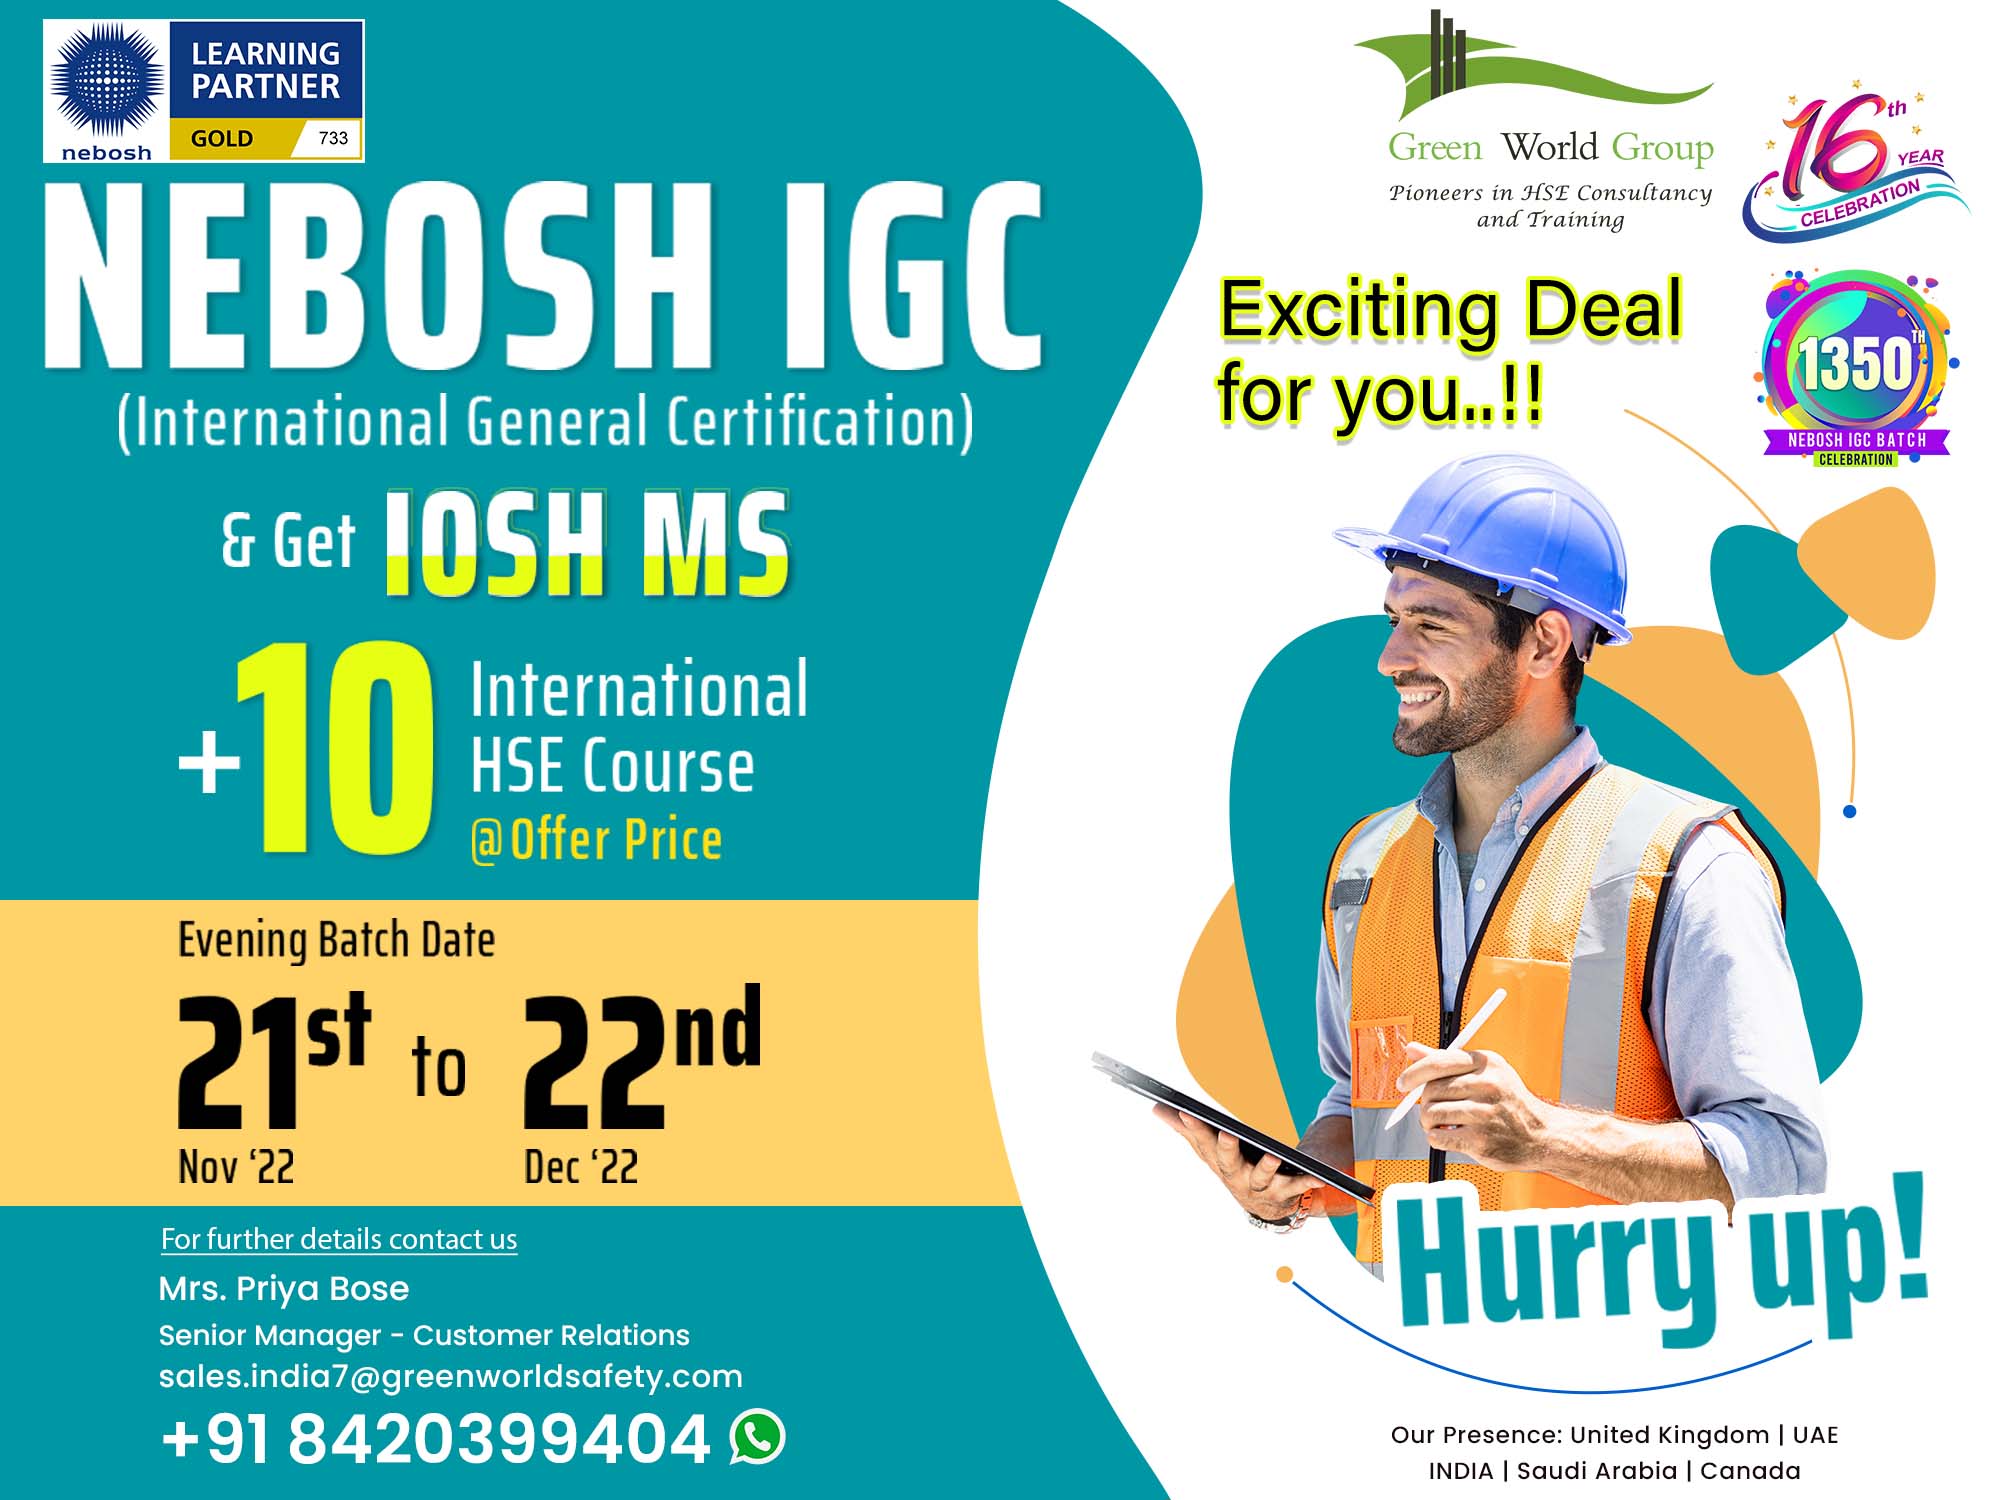 Blockbuster Deal from Green World on NEBOSH IGC course!